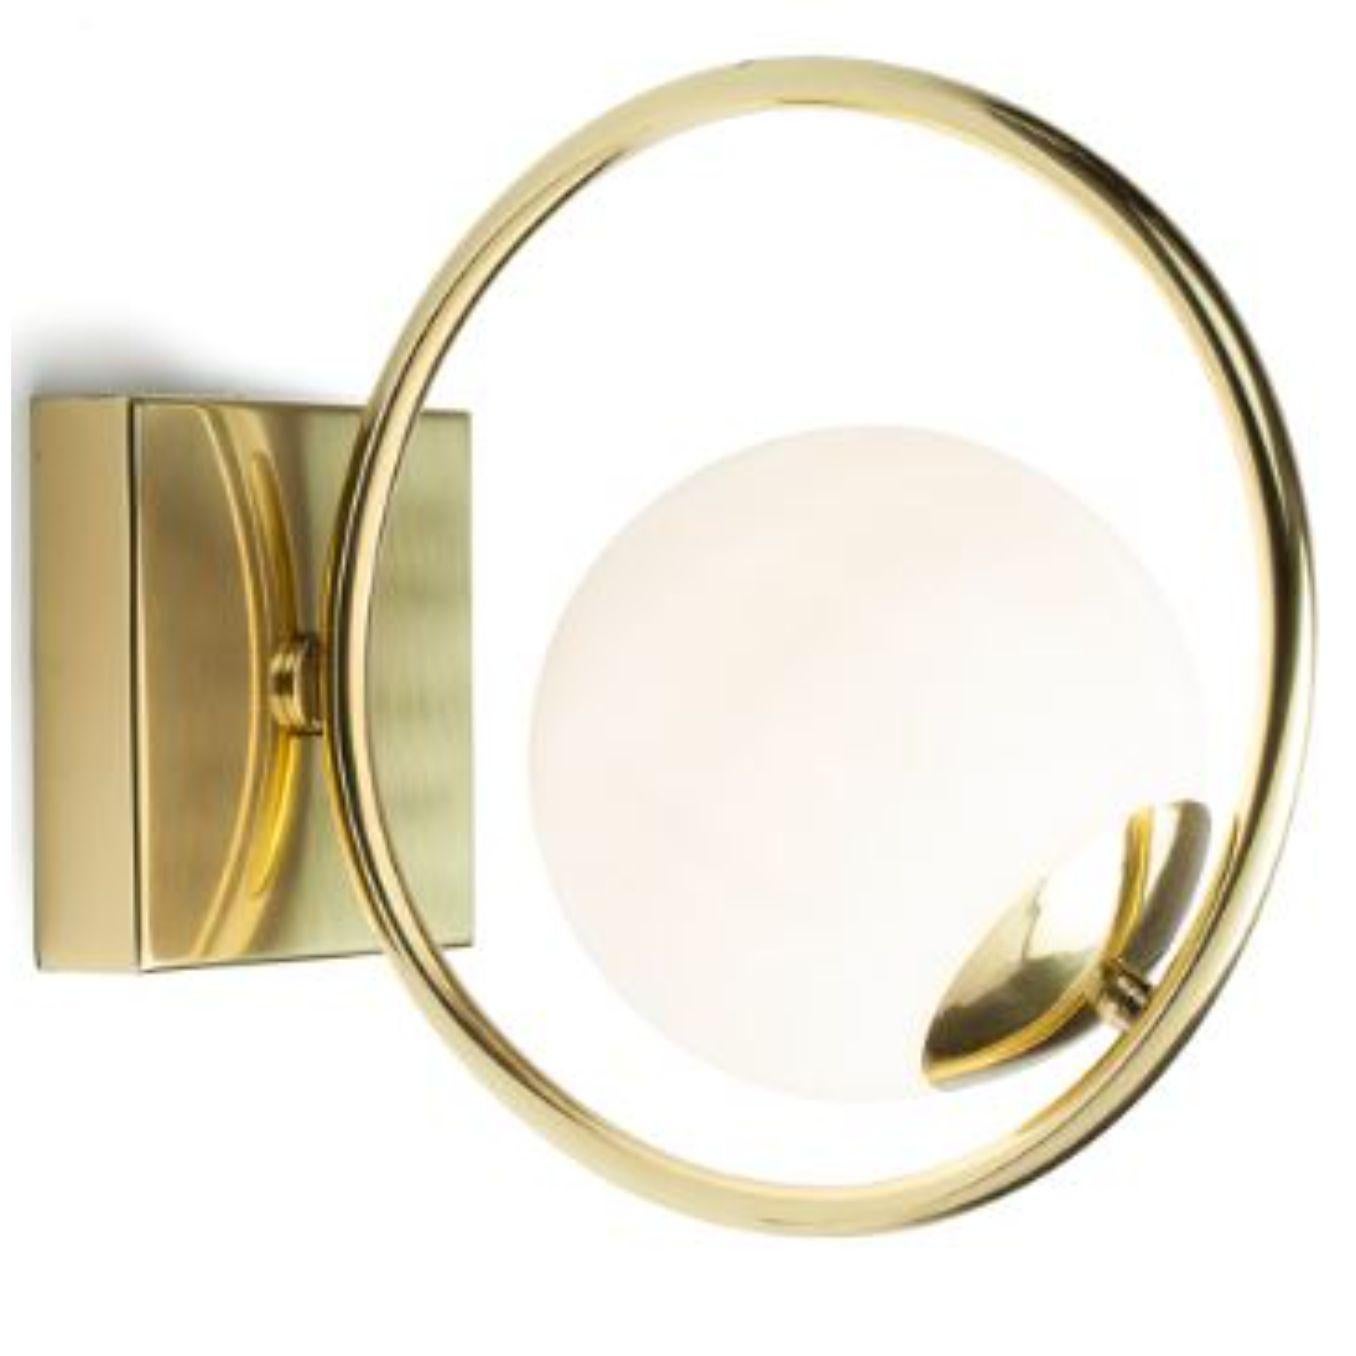 Brass Loop wall lamp by Dooq
Dimensions: W 15 x D 30 x H 27 cm
Materials: lacquered metal, polished or brushed metal, brass.
Also available in different colors and materials. 

Information:
230V/50Hz
1 x max. G9
4W LED

120V/60Hz
1 x max.